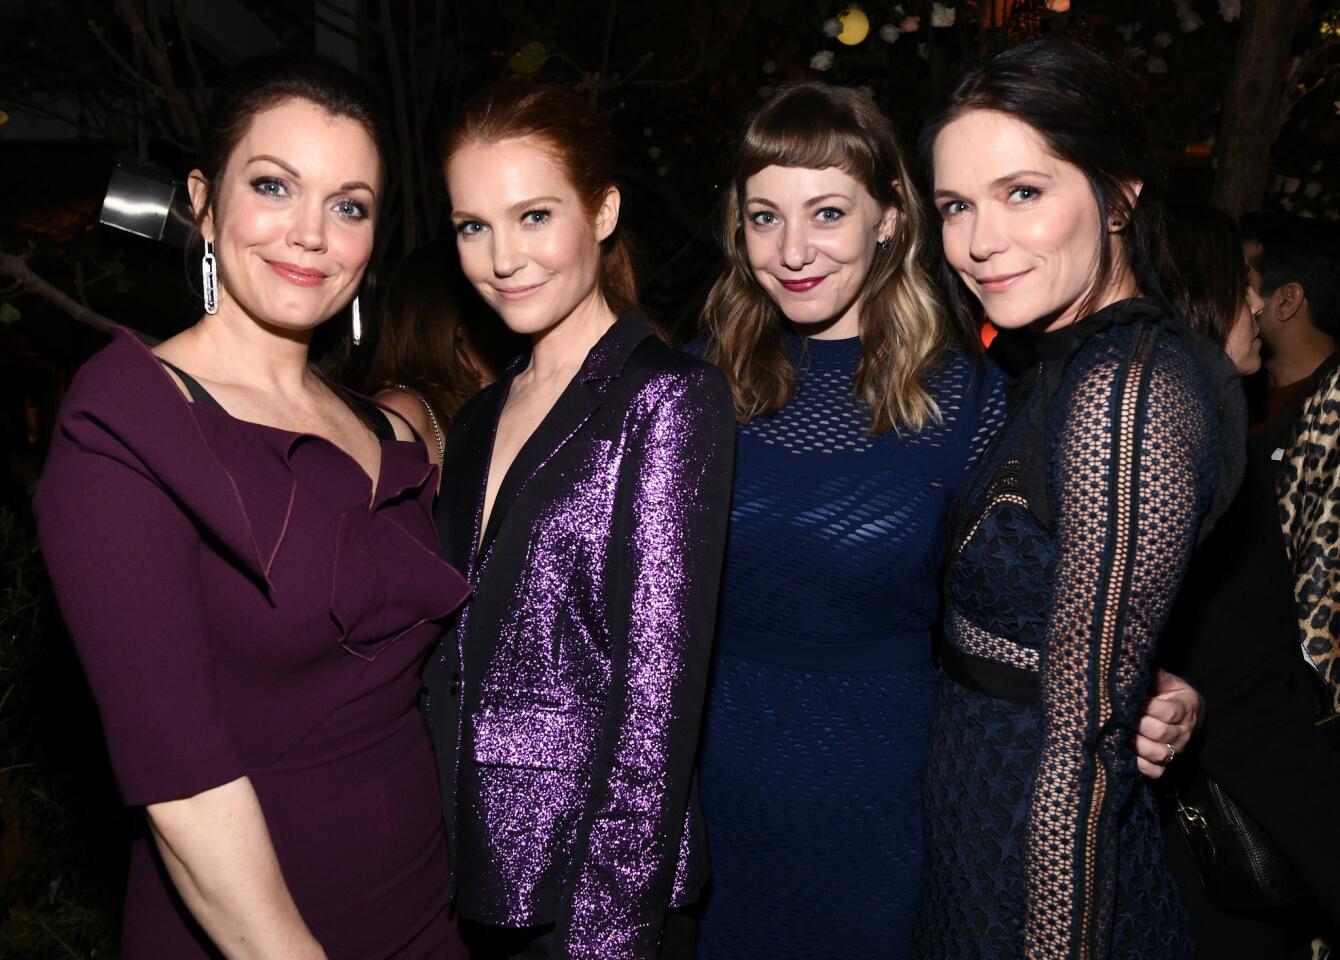 Vanity Fair and Lancome Paris Toast Women in Hollywood, Hosted by Radhika Jones and Ava DuVernay